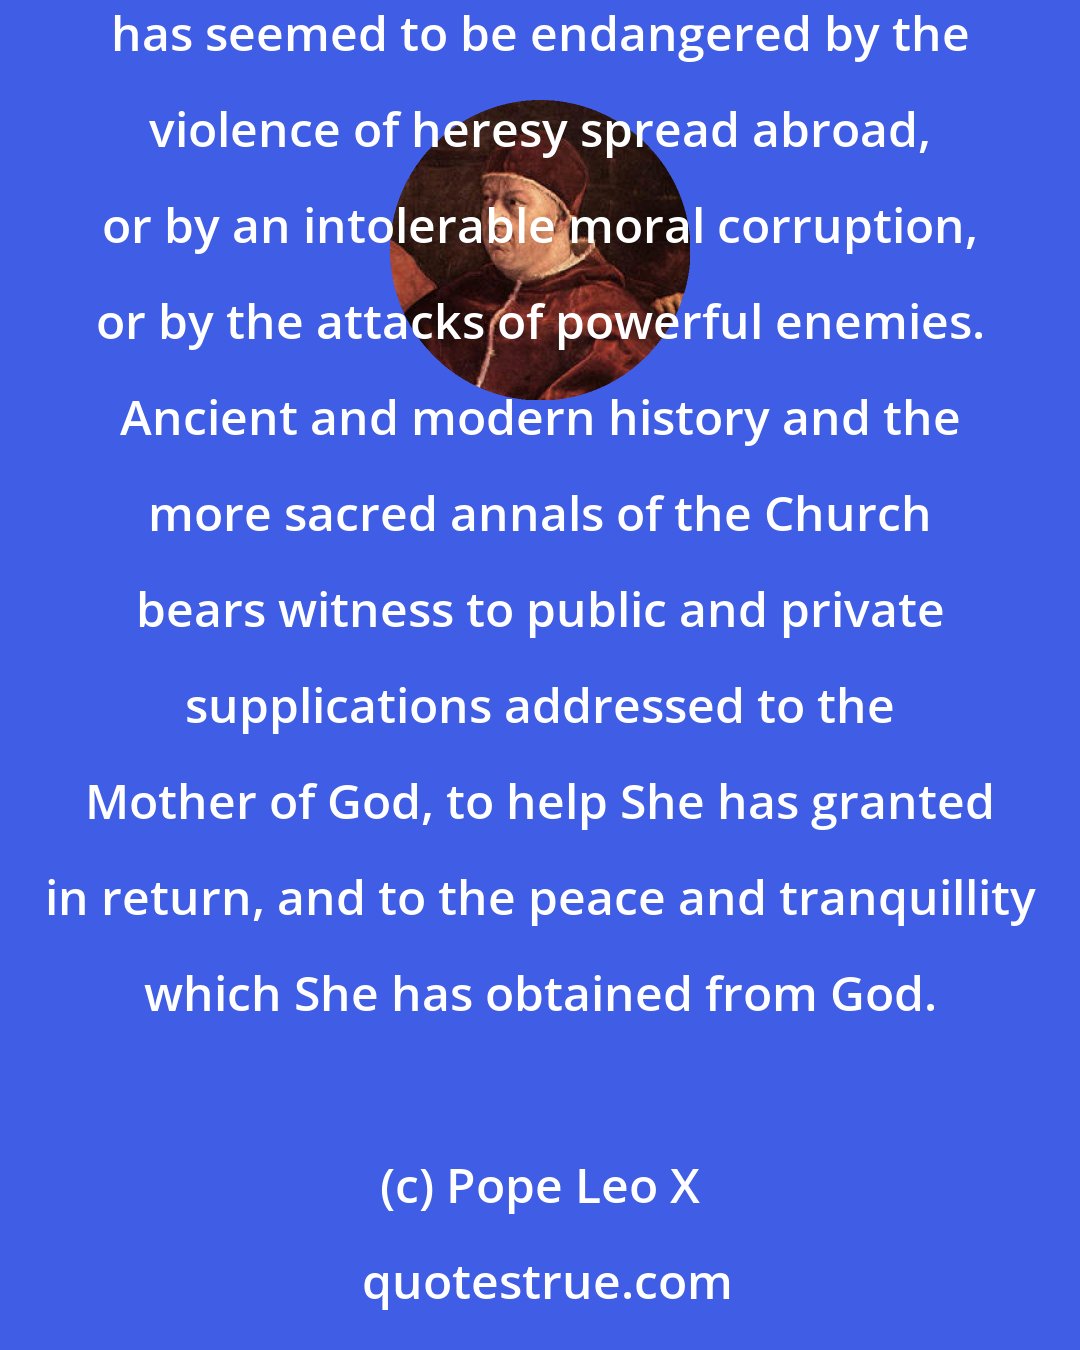 Pope Leo X: This devotion, so great and so confident, to the august Queen of Heaven, has never forth with such brilliancy as when the militant Church of Go has seemed to be endangered by the violence of heresy spread abroad, or by an intolerable moral corruption, or by the attacks of powerful enemies. Ancient and modern history and the more sacred annals of the Church bears witness to public and private supplications addressed to the Mother of God, to help She has granted in return, and to the peace and tranquillity which She has obtained from God.